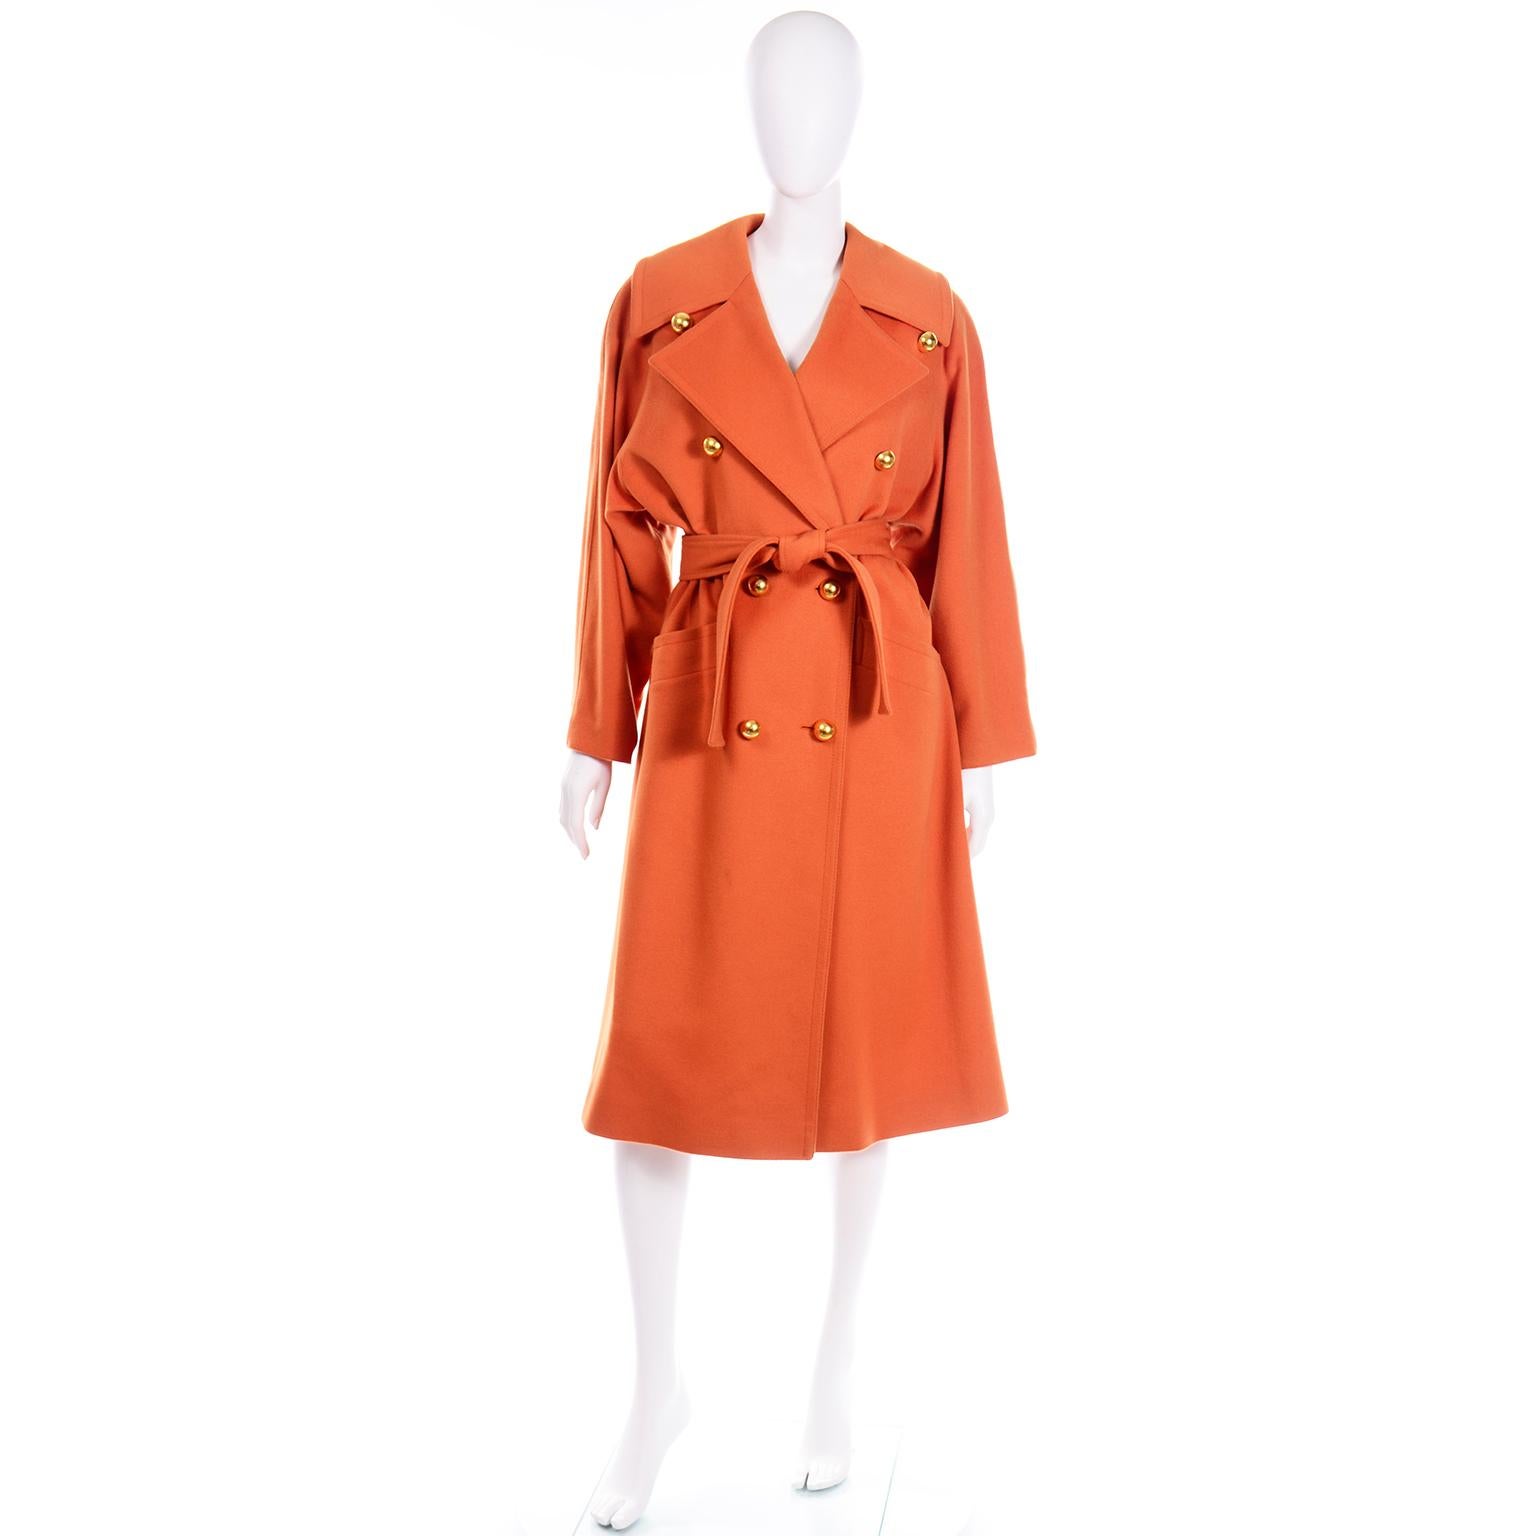 This is a gorgeous orange wool cashmere blend vintage 1980's Guy Laroche double breasted trench coat with round gold buttons. There are two functional front pockets and shoulder pads for structure. We especially love the box pleat along the back